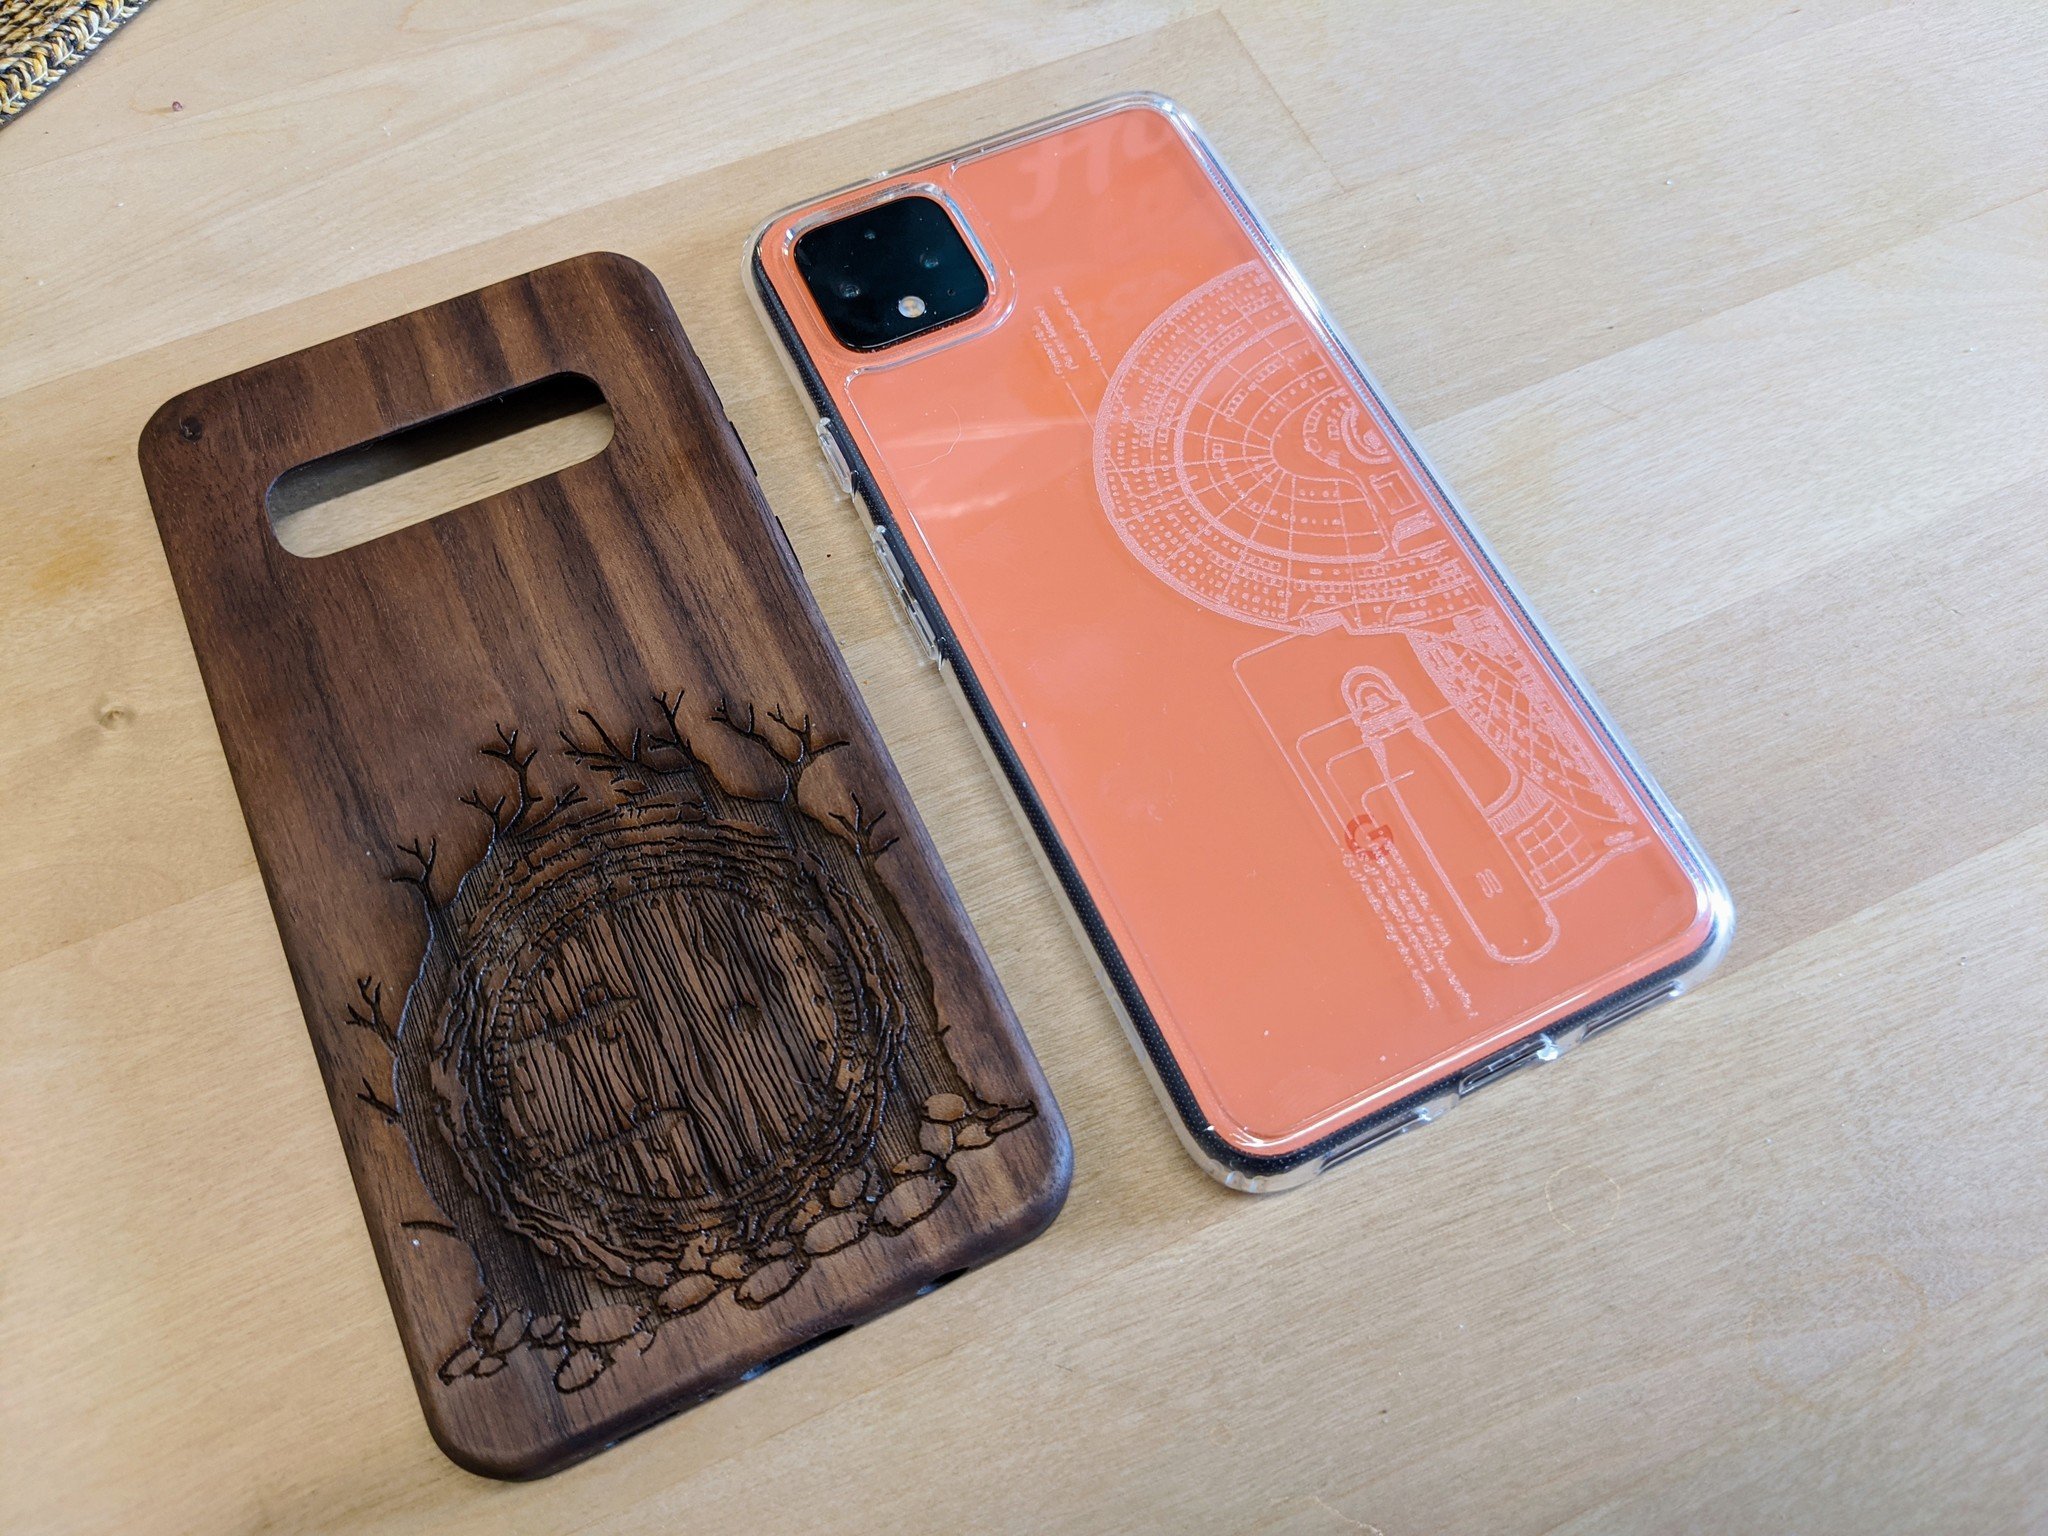 Mobile phone cases etched with SVG